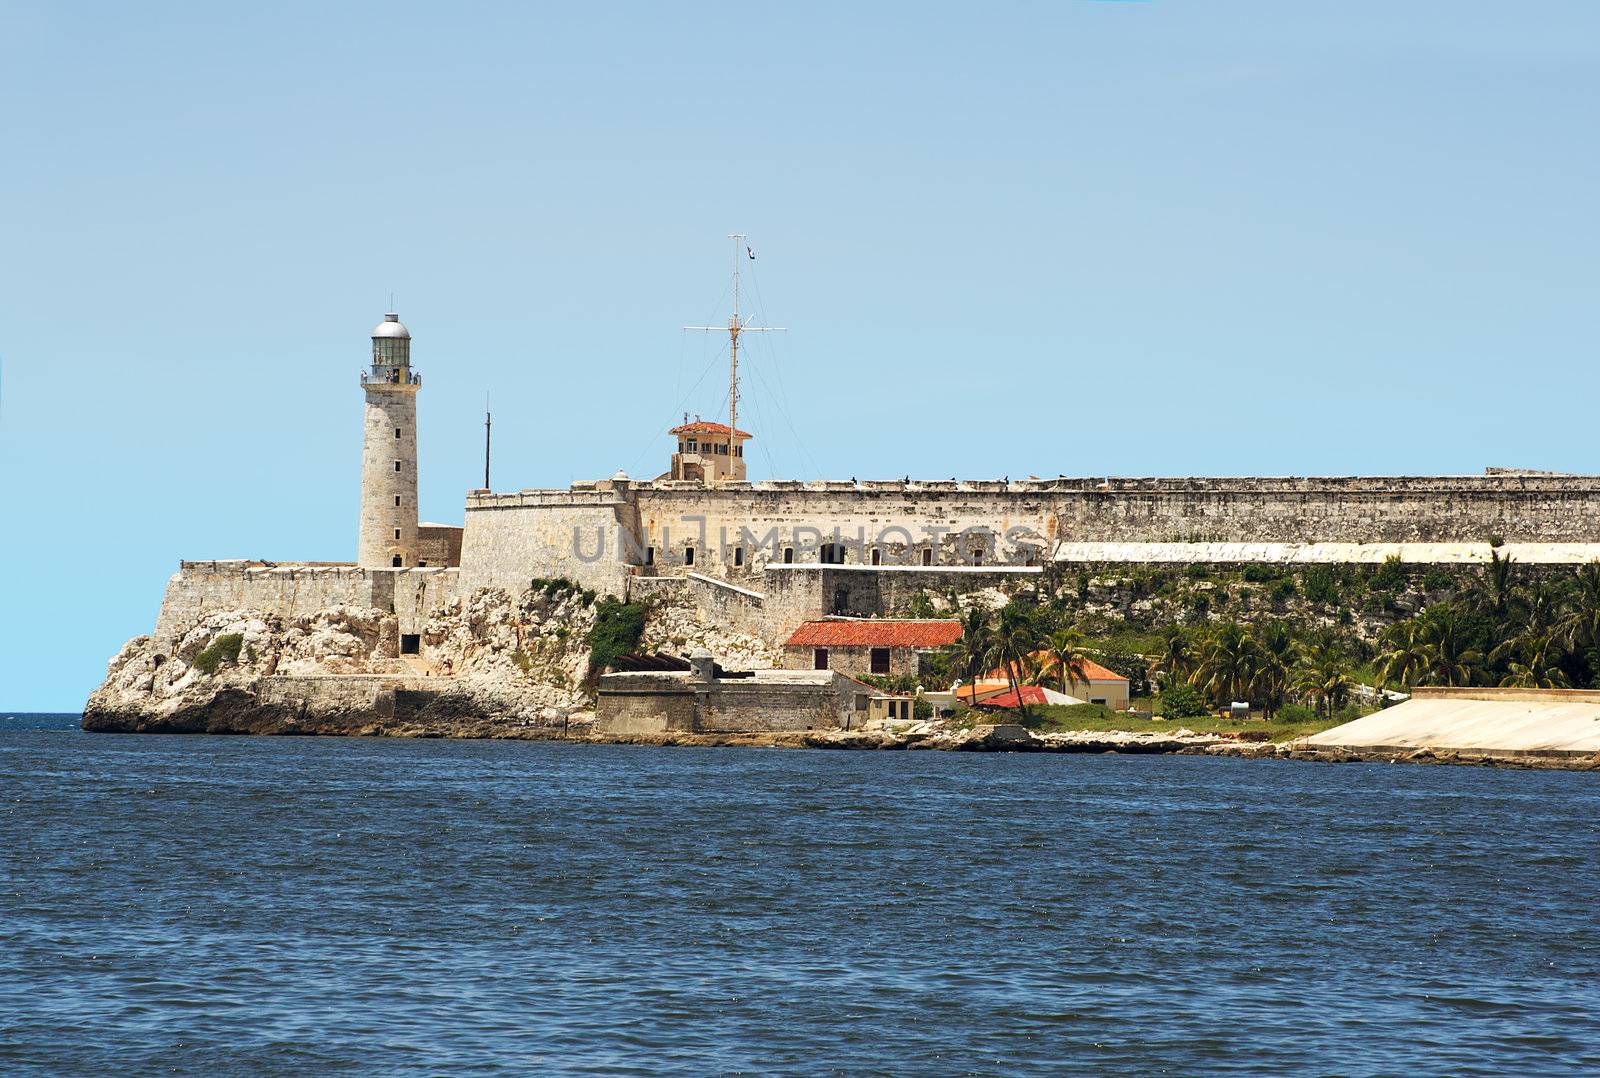 The fortress of El Morro in the bay of Havana in a clear day